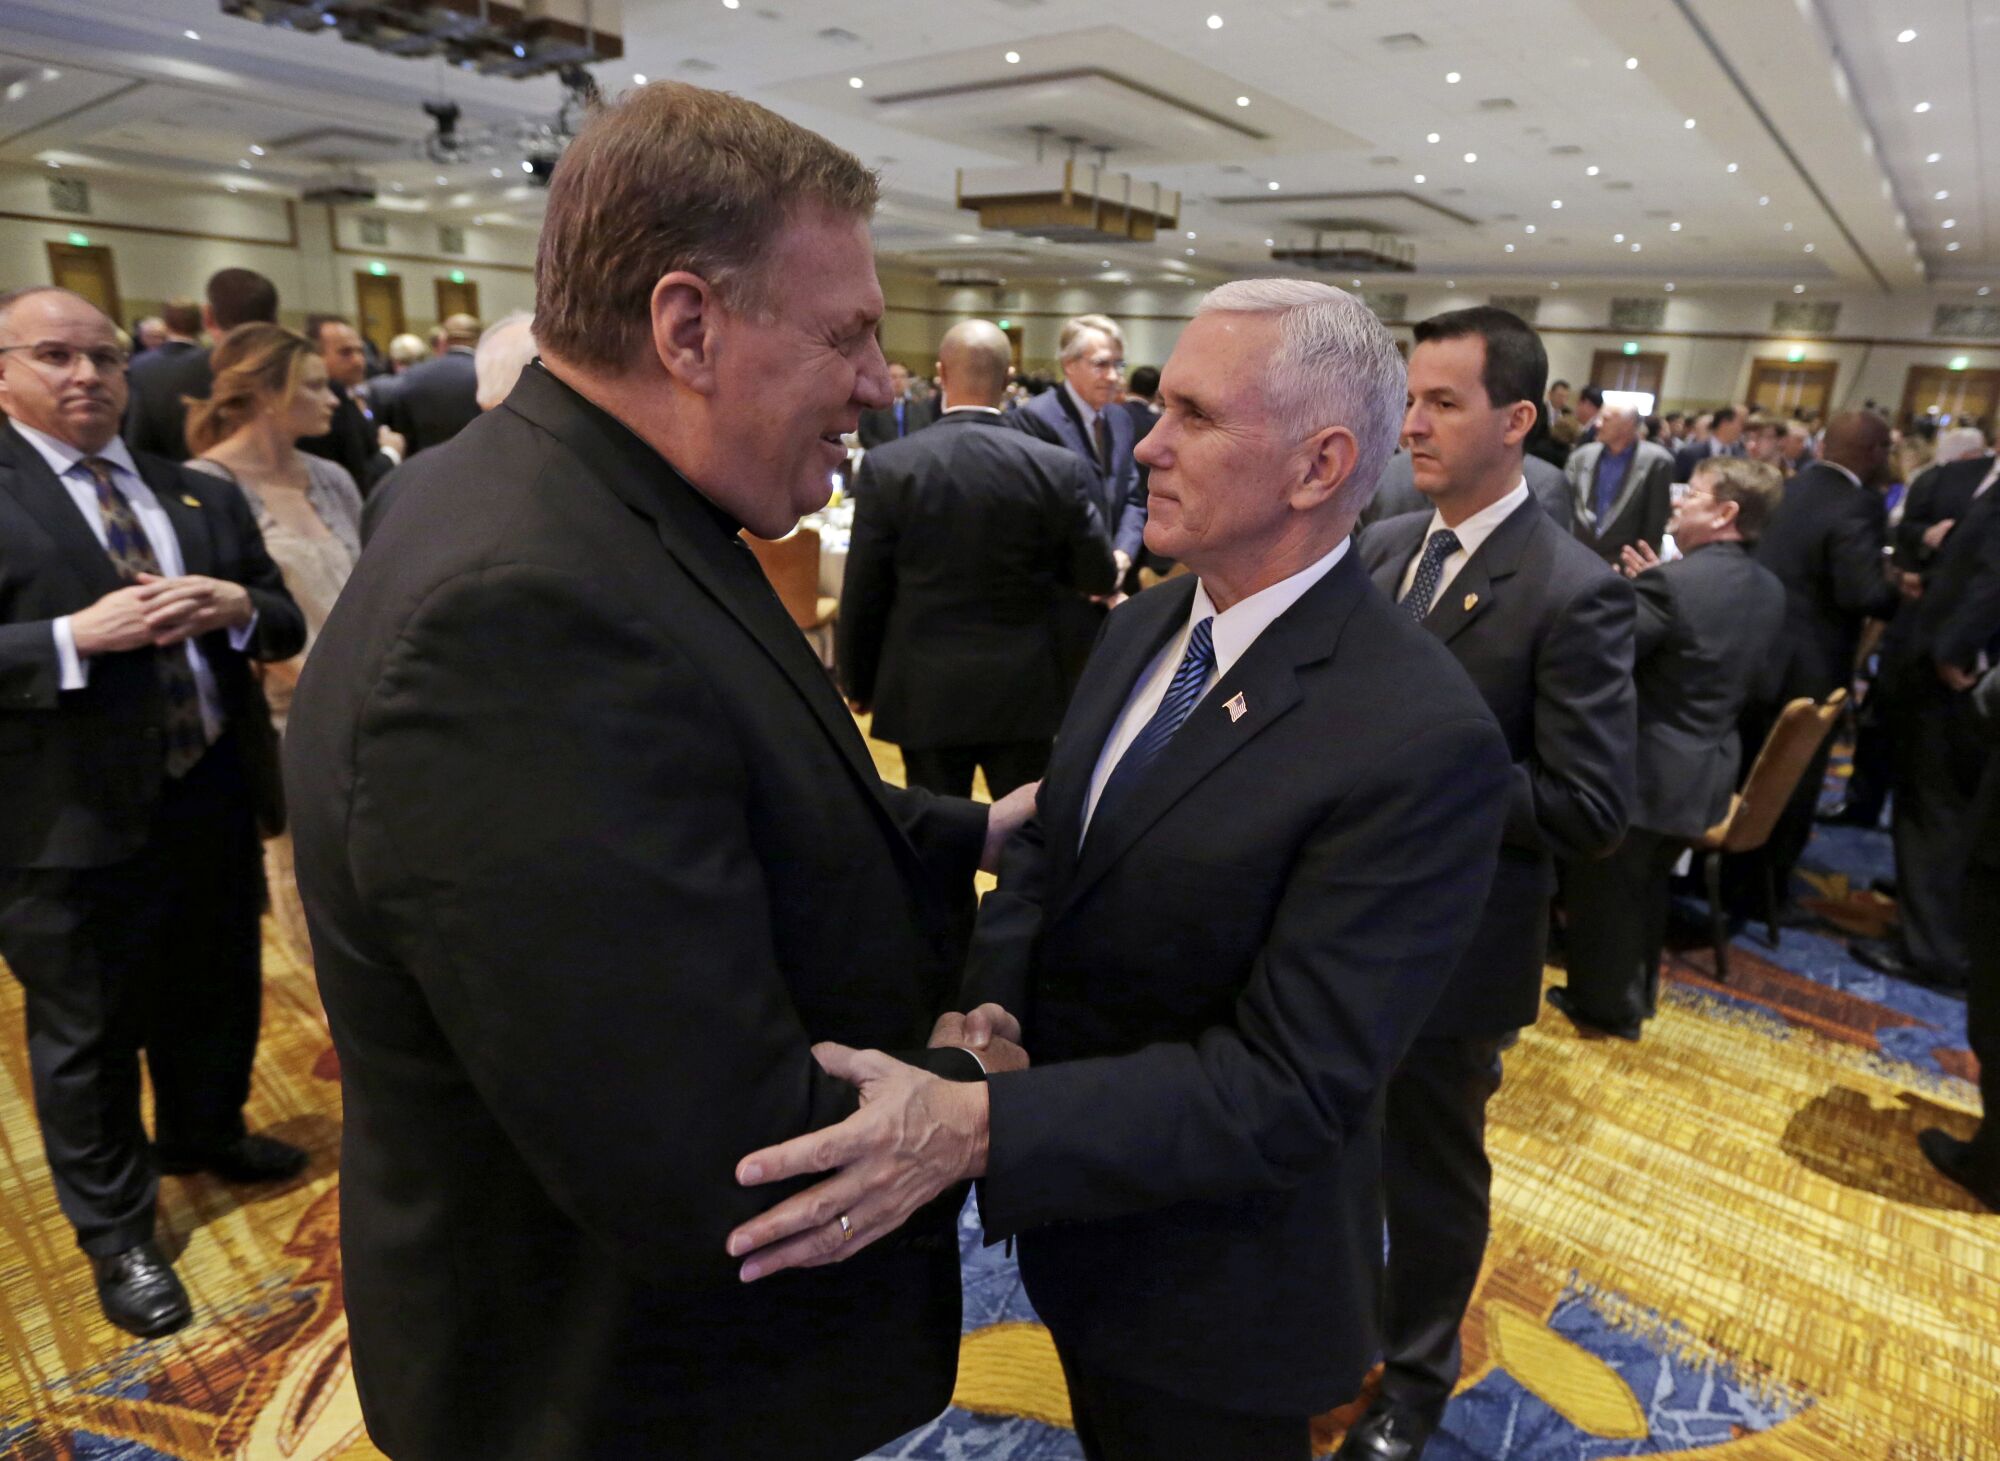 Mike Pence, right, and Cardinal Joseph W. Tobin greet each other in Indianapolis after the 2016 election.